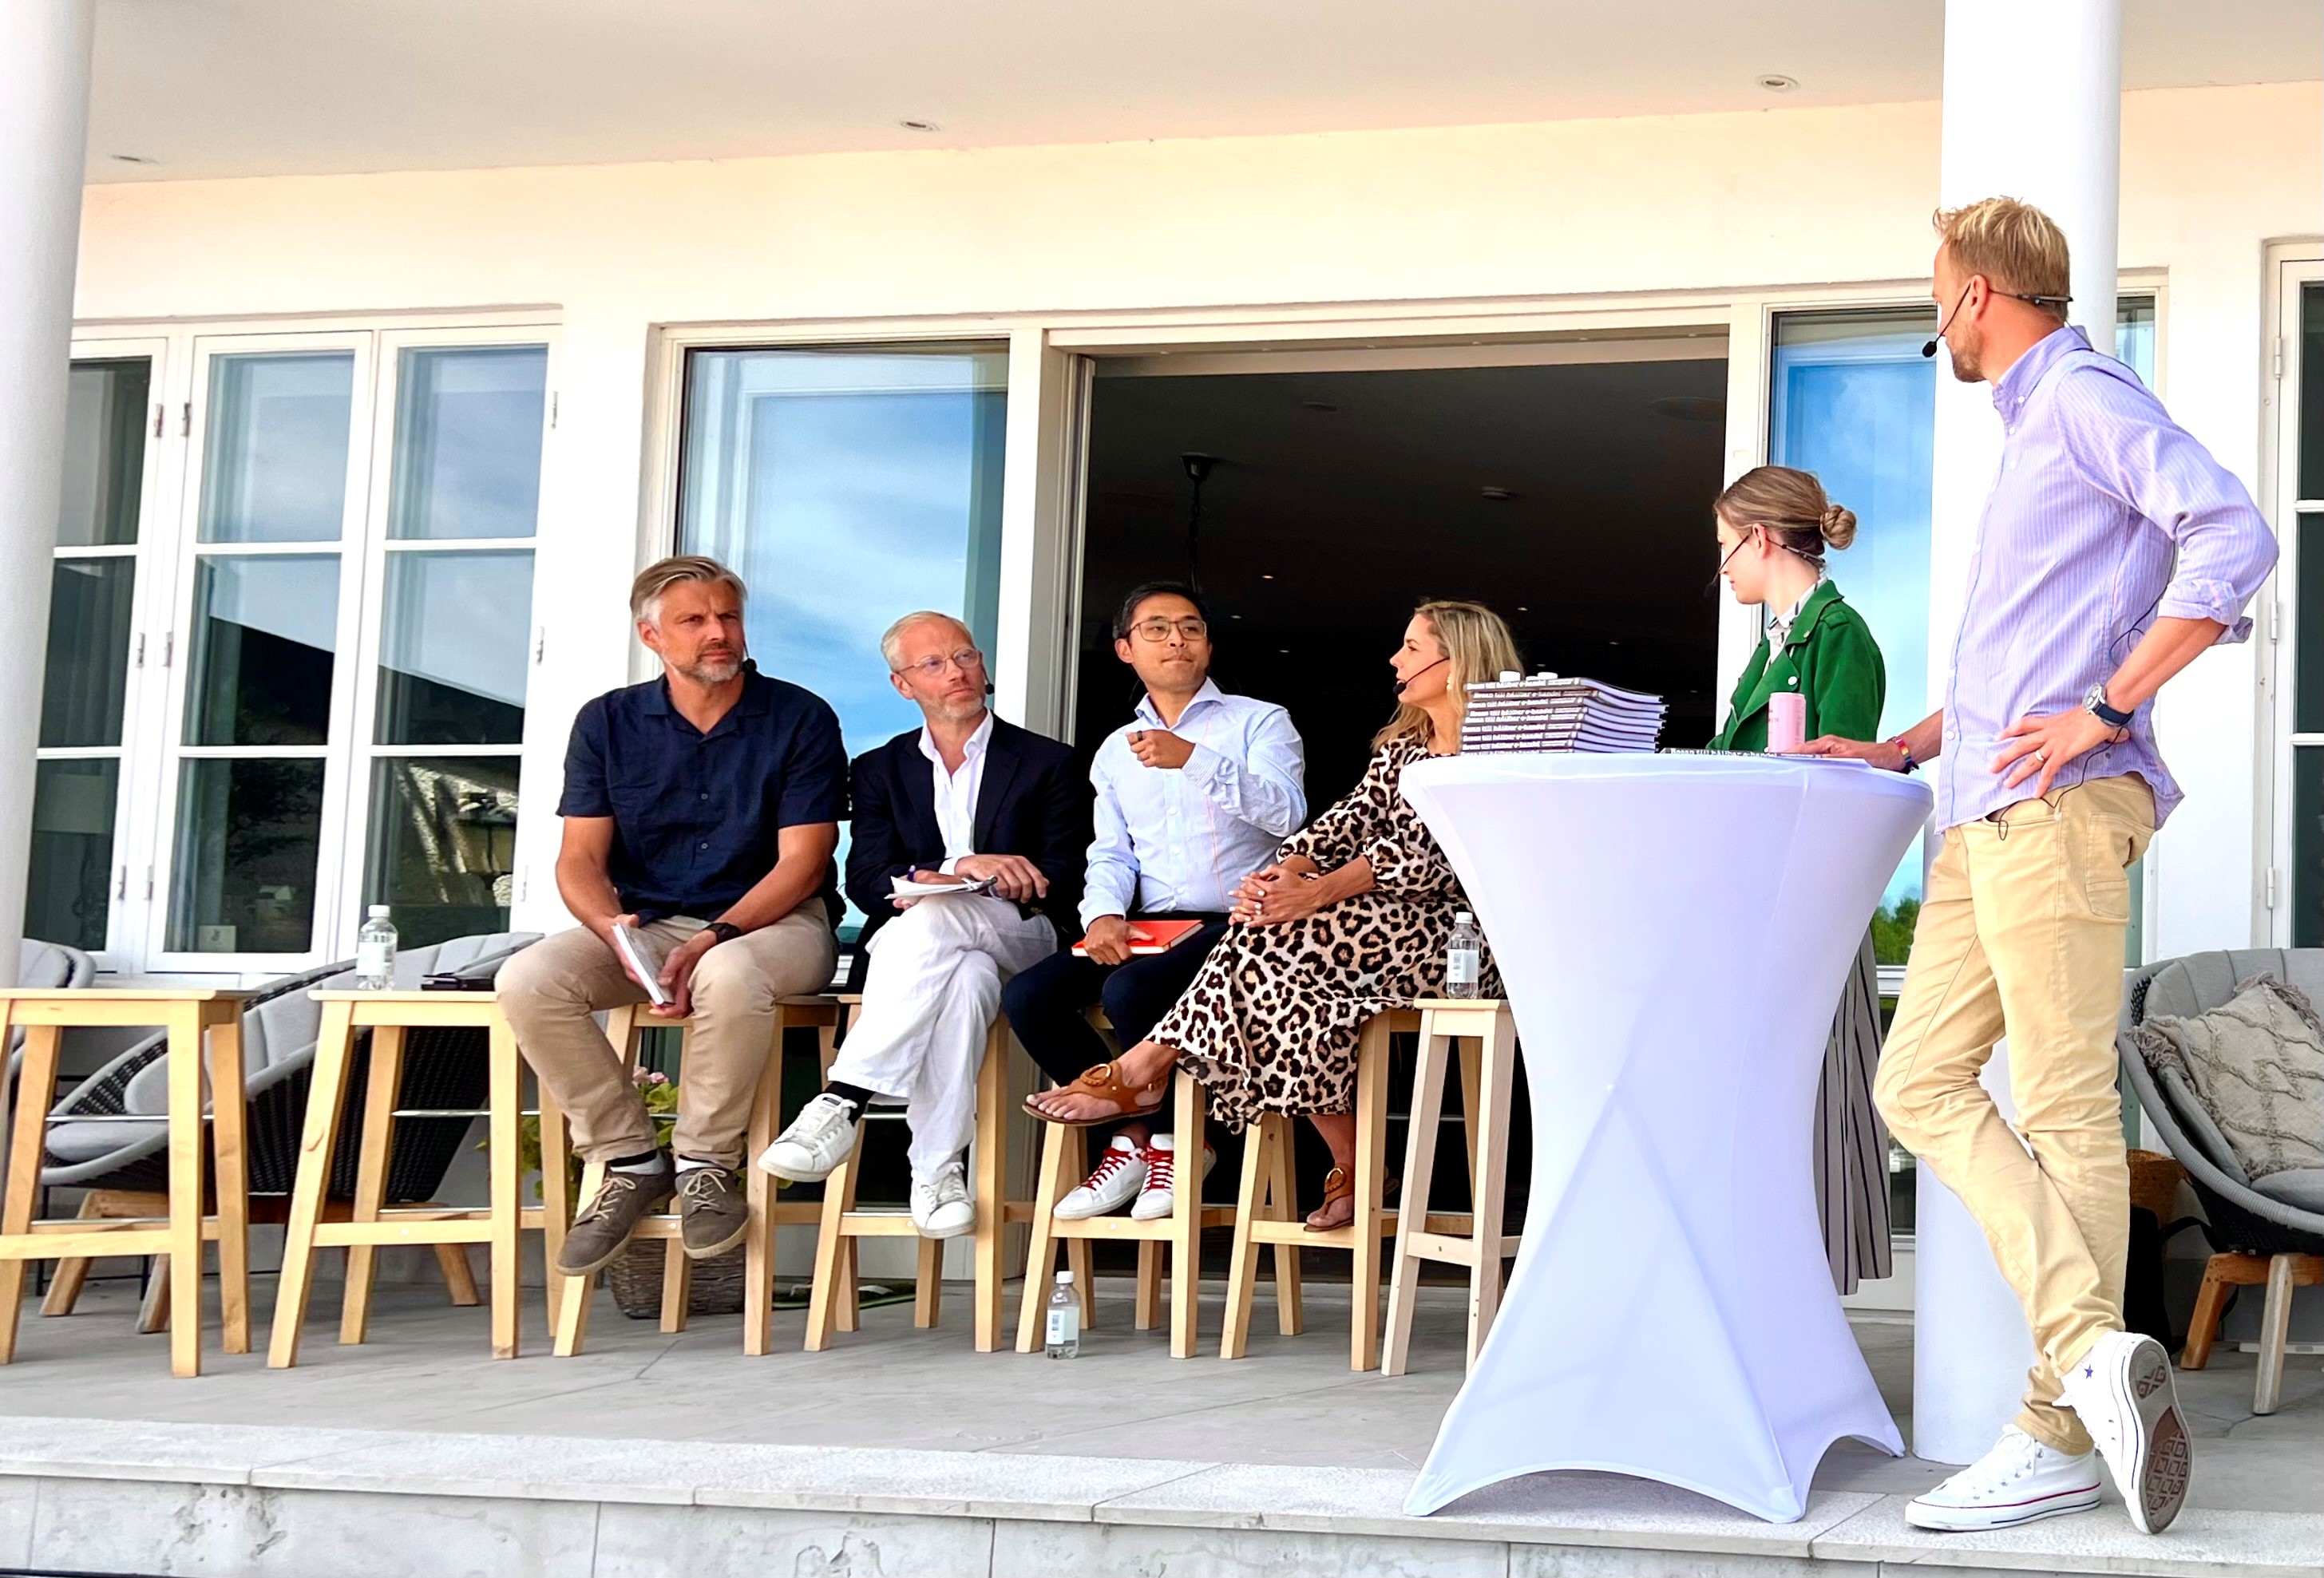 Haypp Group in Almedalen: Sustainability must be a part of the whole deal